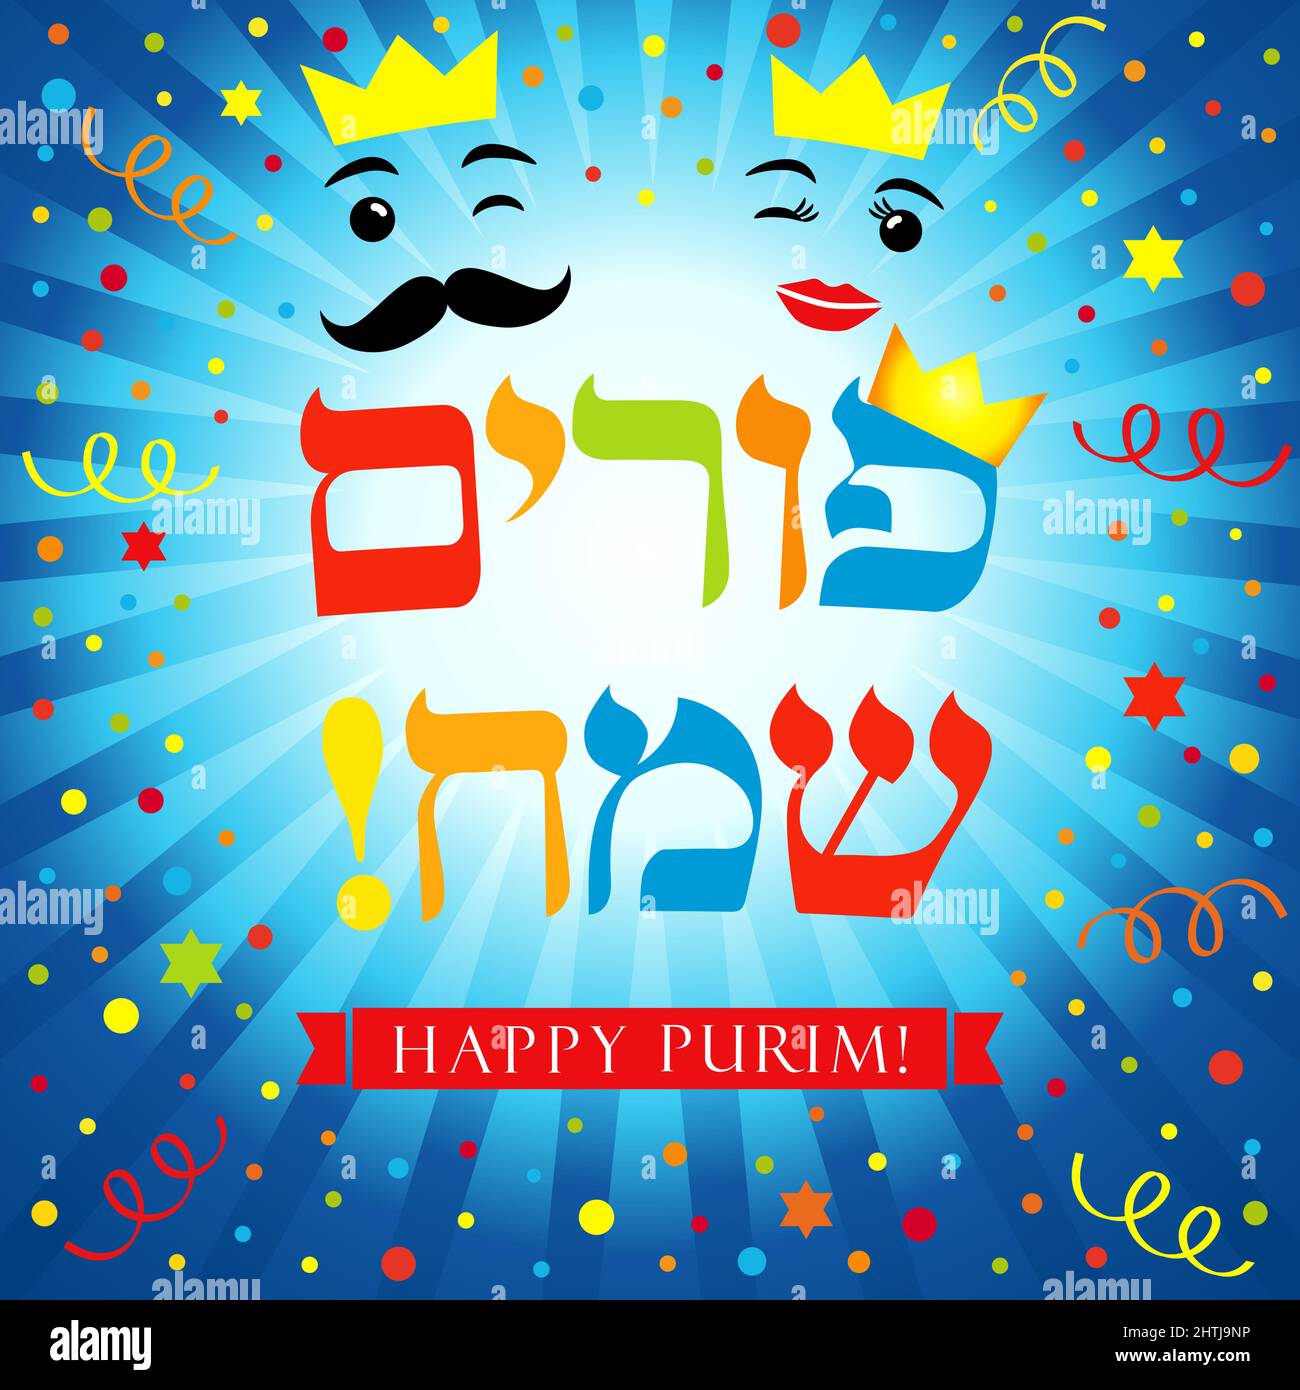 Happy purim congrats and colored confetti. Isolated abstract graphic design template. Happy Purim Jewish script, colour backdrop, king and queen carto Stock Vector